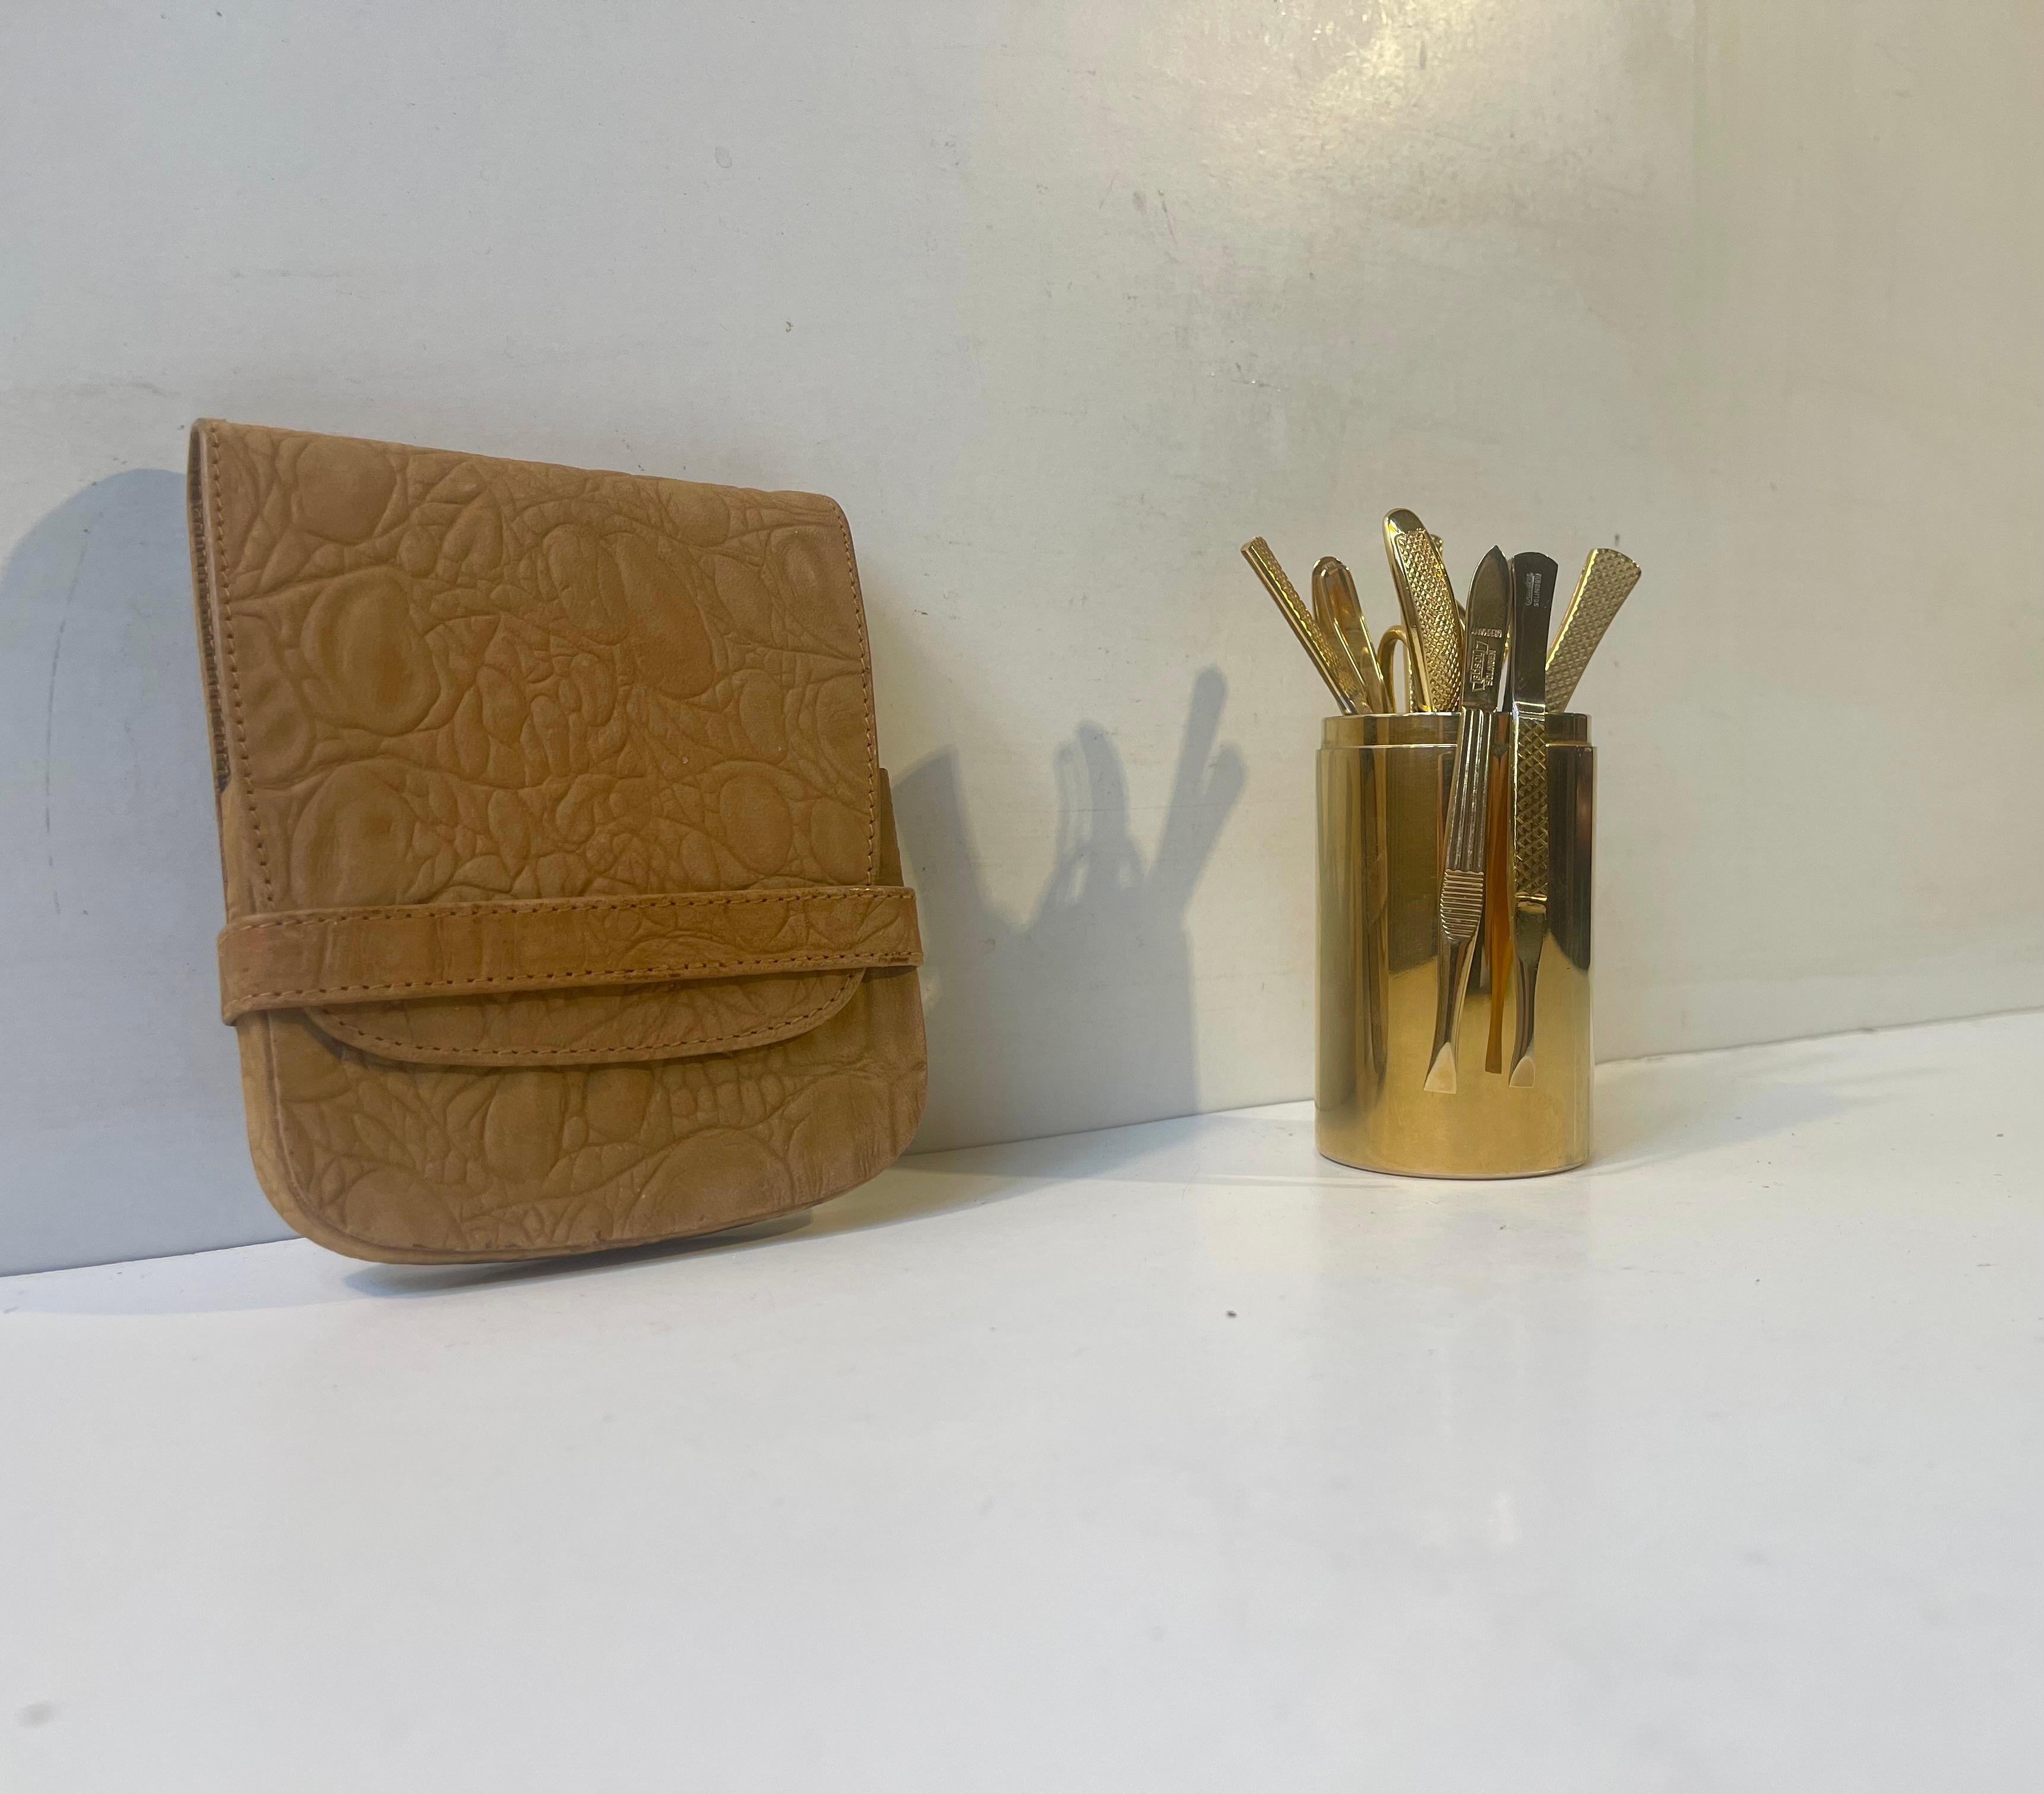 Decorative yet very useable vanity or travel manicure set consisting of 10 parts including the leather pouch and Gold Plated Cup. The manicure set was made by Gosol in Germany circa 1960-75 and the accompaning jar by Hugo Asmussen in Denmark. All